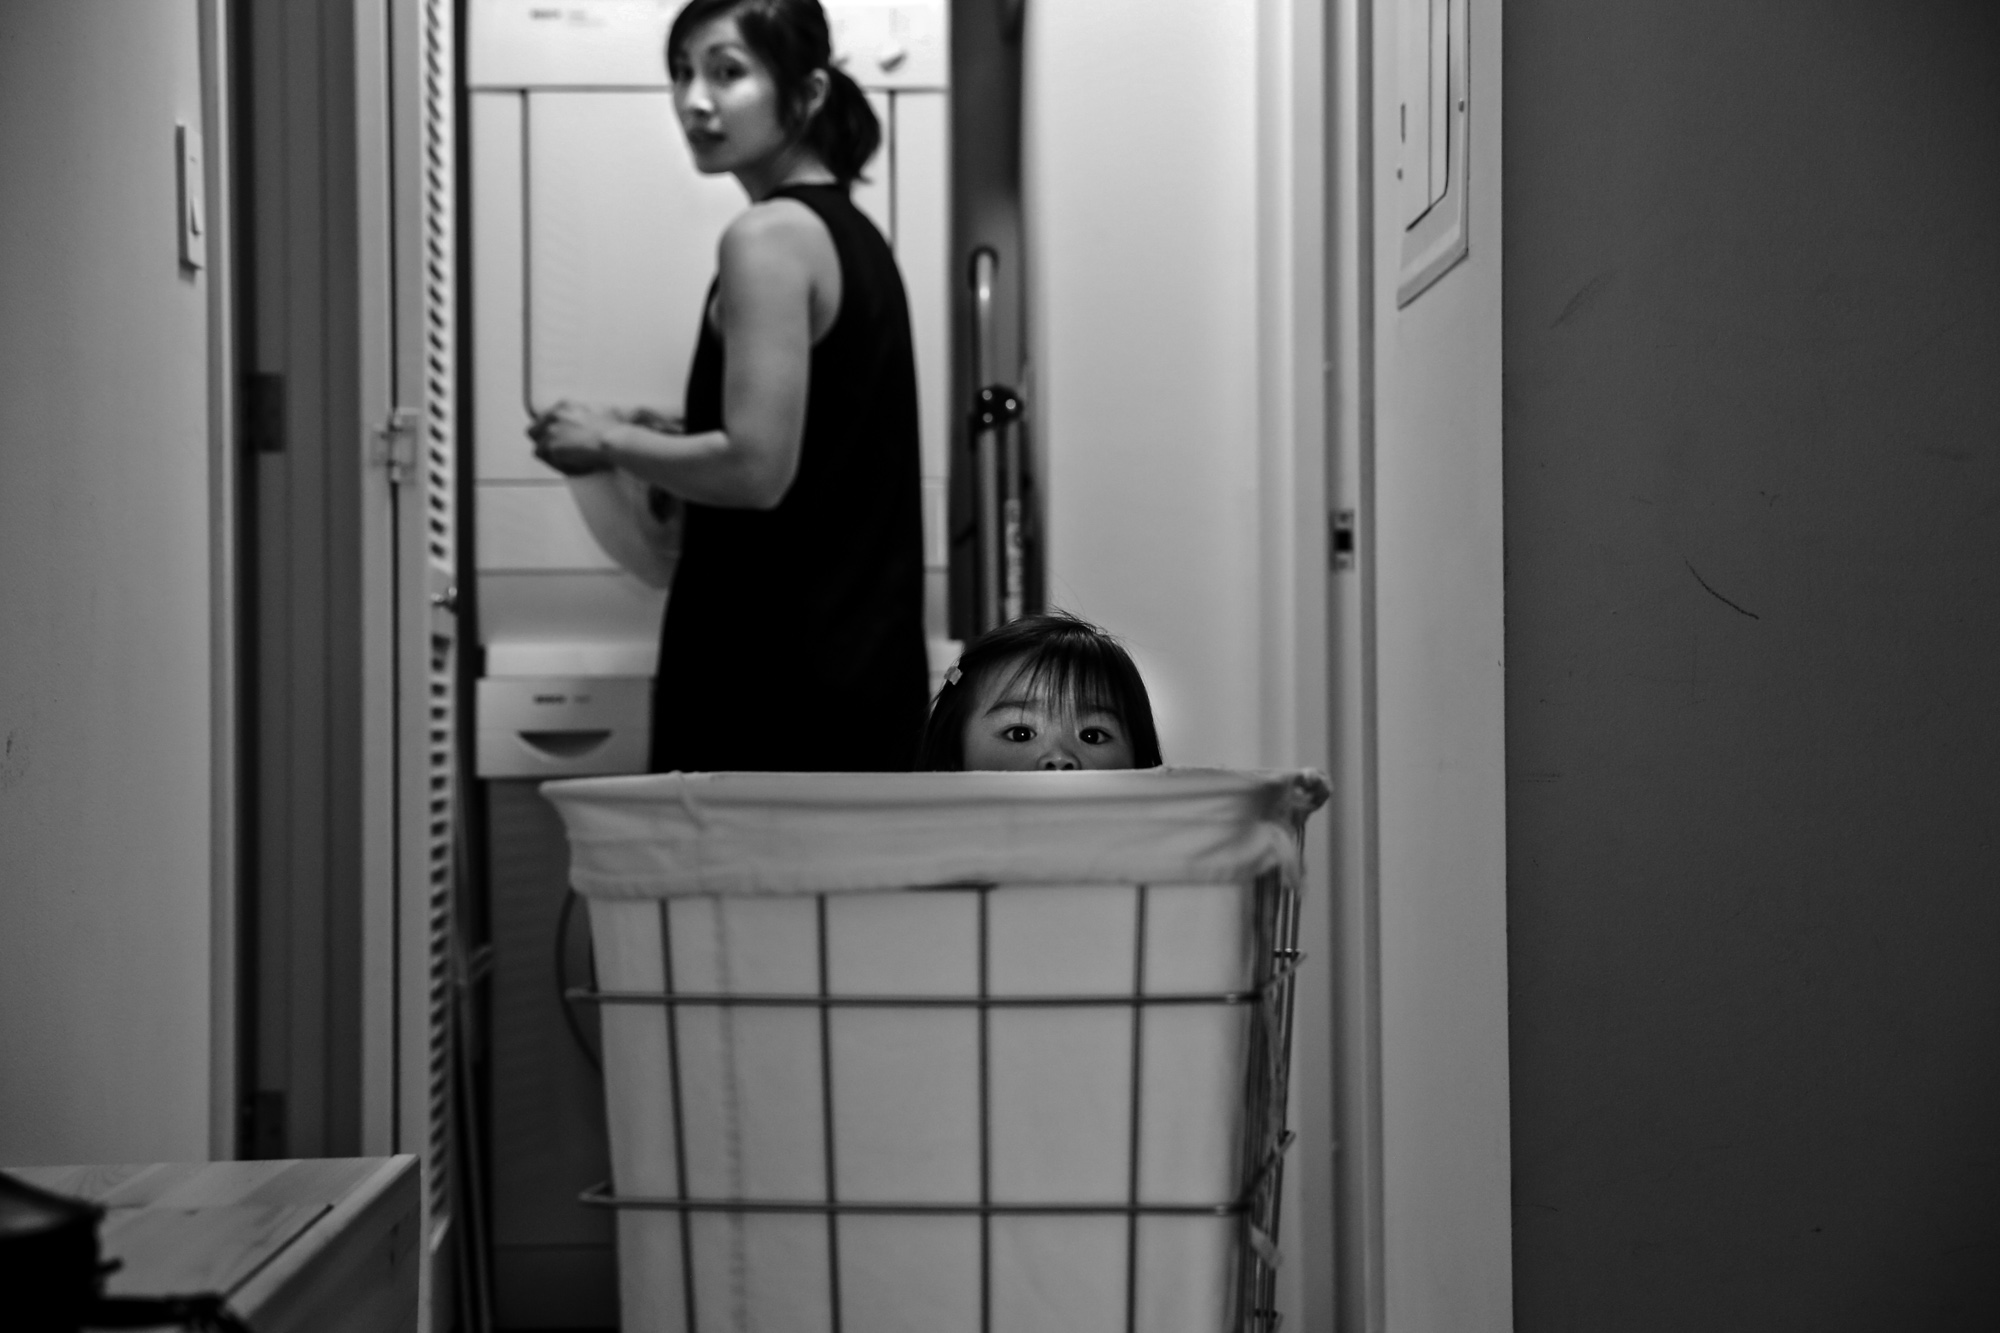 Girl peeks out behind laundry basket while woman looks